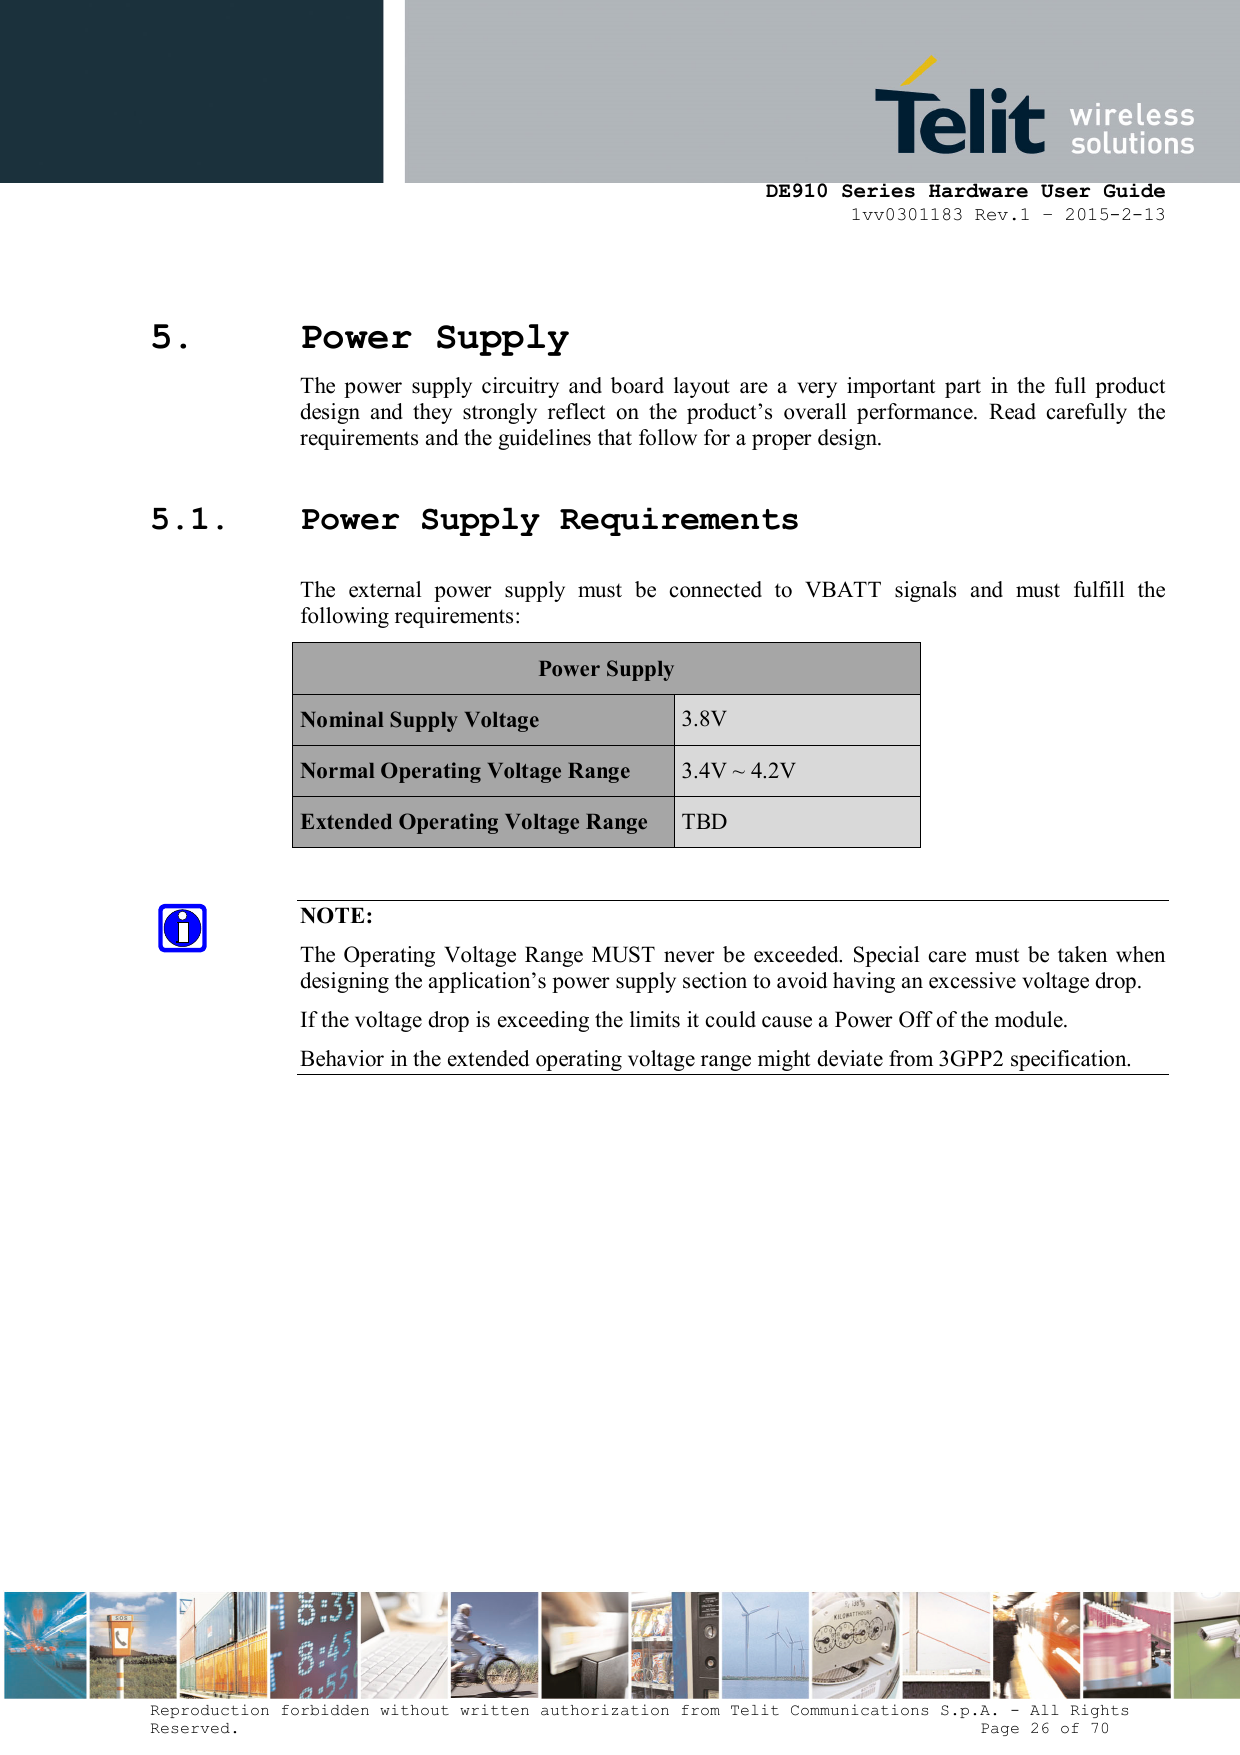      DE910 Series Hardware User Guide 1vv0301183 Rev.1 – 2015-2-13 Reproduction forbidden without written authorization from Telit Communications S.p.A. - All Rights Reserved.                                                                          Page 26 of 70 5. Power Supply The  power  supply  circuitry  and  board  layout  are  a  very  important  part  in  the  full  product design  and  they  strongly  reflect  on  the  product’s  overall  performance.  Read  carefully  the requirements and the guidelines that follow for a proper design. 5.1. Power Supply Requirements The  external  power  supply  must  be  connected  to  VBATT  signals  and  must  fulfill  the following requirements: Power Supply Nominal Supply Voltage  3.8V Normal Operating Voltage Range  3.4V ~ 4.2V Extended Operating Voltage Range  TBD  NOTE: The  Operating  Voltage  Range MUST  never  be  exceeded.  Special care  must be taken  when designing the application’s power supply section to avoid having an excessive voltage drop. If the voltage drop is exceeding the limits it could cause a Power Off of the module. Behavior in the extended operating voltage range might deviate from 3GPP2 specification.             